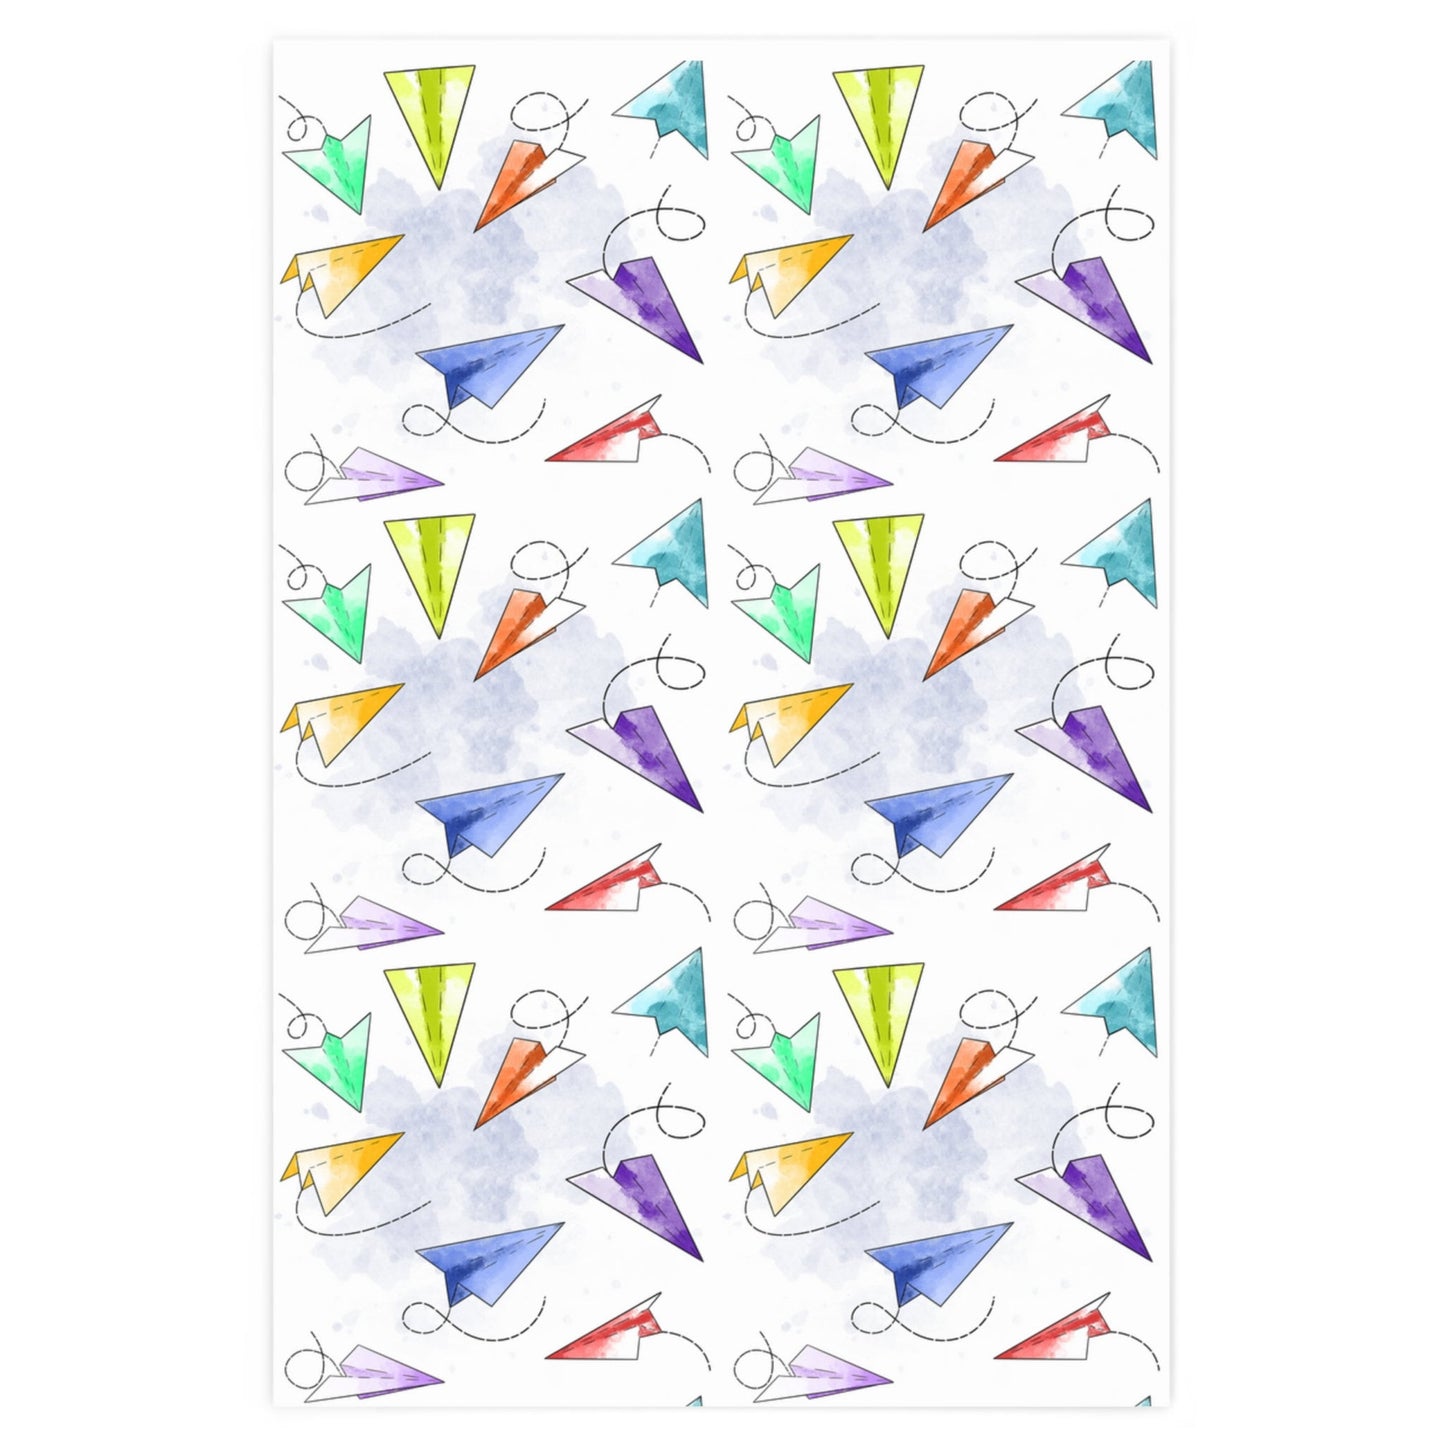 Paper Airplane Gift Wrap, Kids Wrapping Paper Roll, Plane Birthday Wrapping Gift Paper, Xmas Wrapping, Funny Wrapping Paper for Teacher Gift